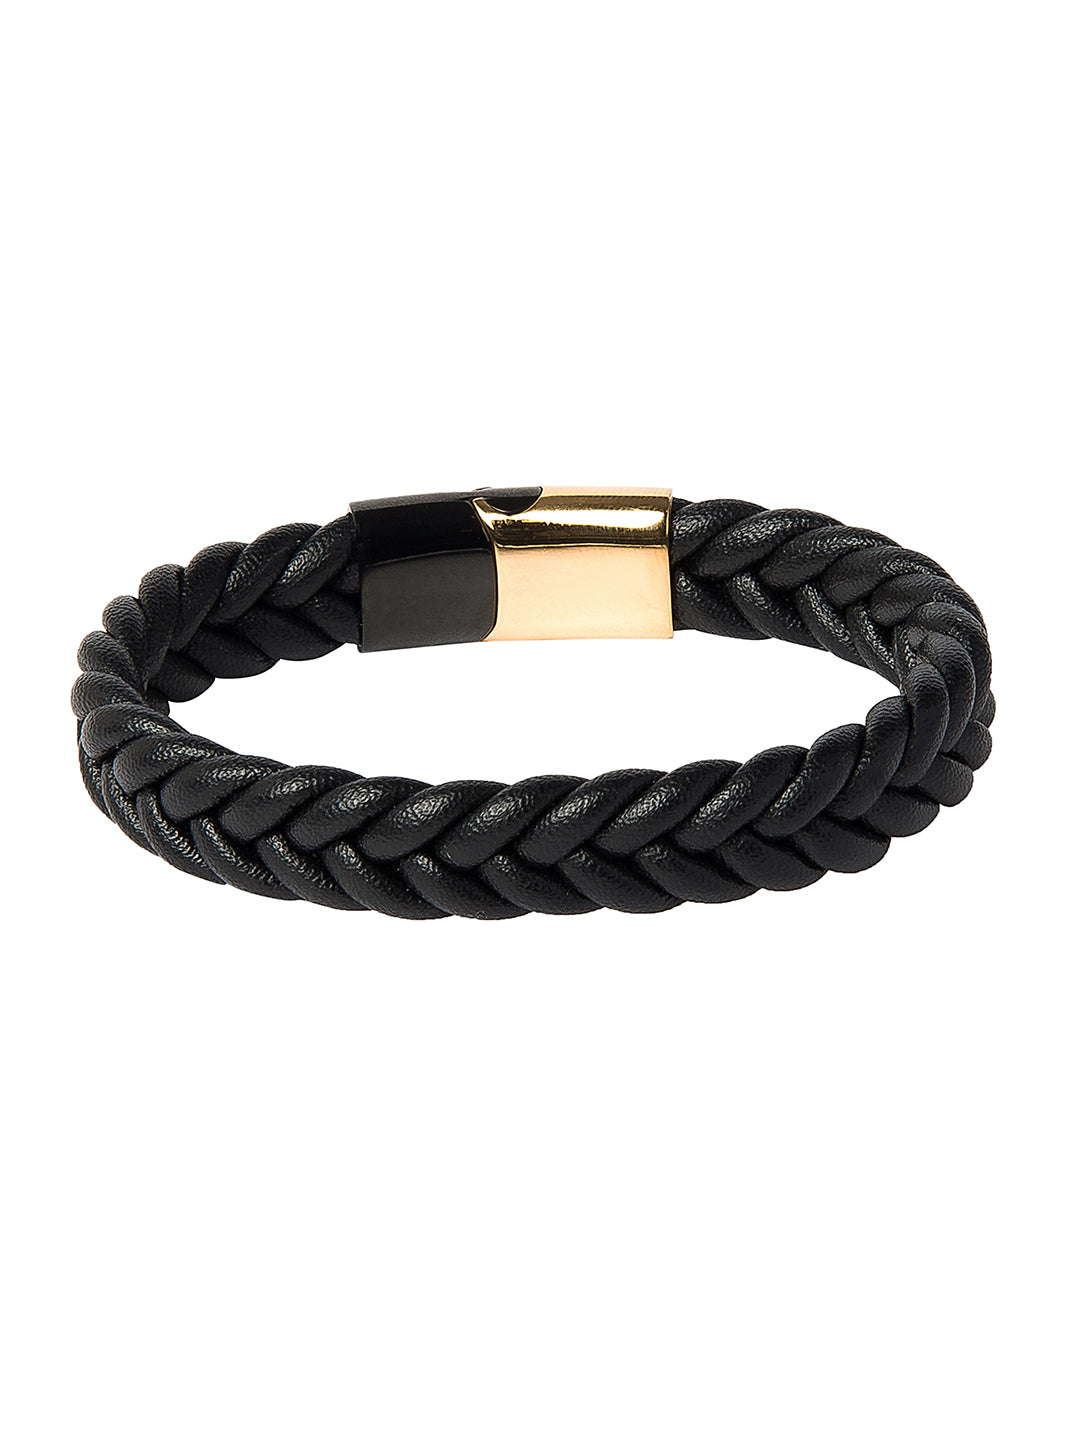 Buy  Mens Premium Genuine Leather Bracelet Glory in Black  Magnetic  Stainless Steel Clasp in Silver and Gold  Exclusive Jewellery Box  Great  Gift Idea Online at desertcartINDIA